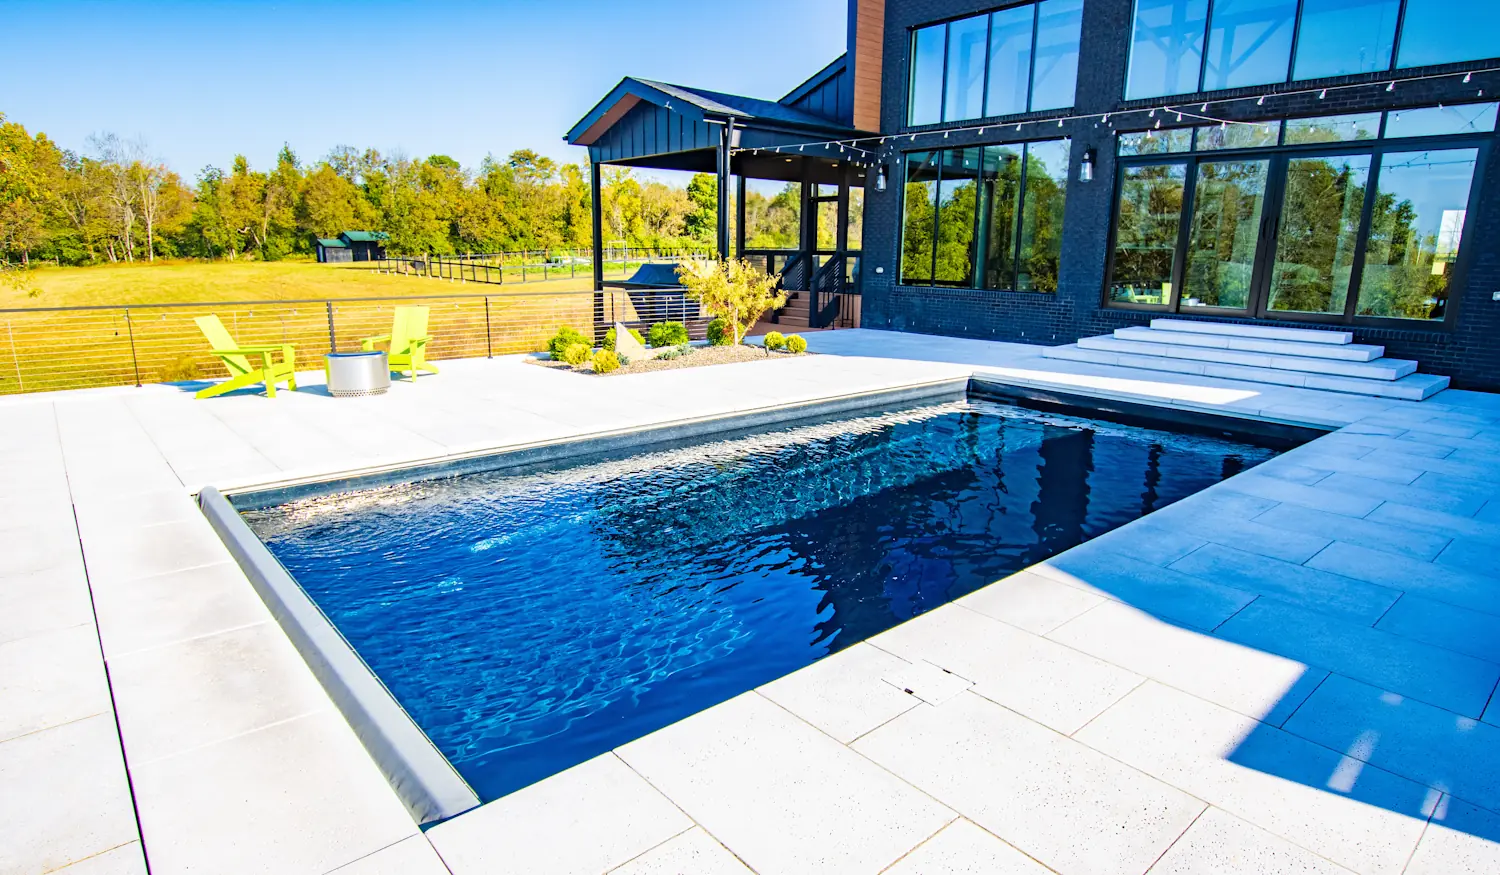 lanning Your Dream Fiberglass Pool for Next Summer: A Leisure Pools Guide